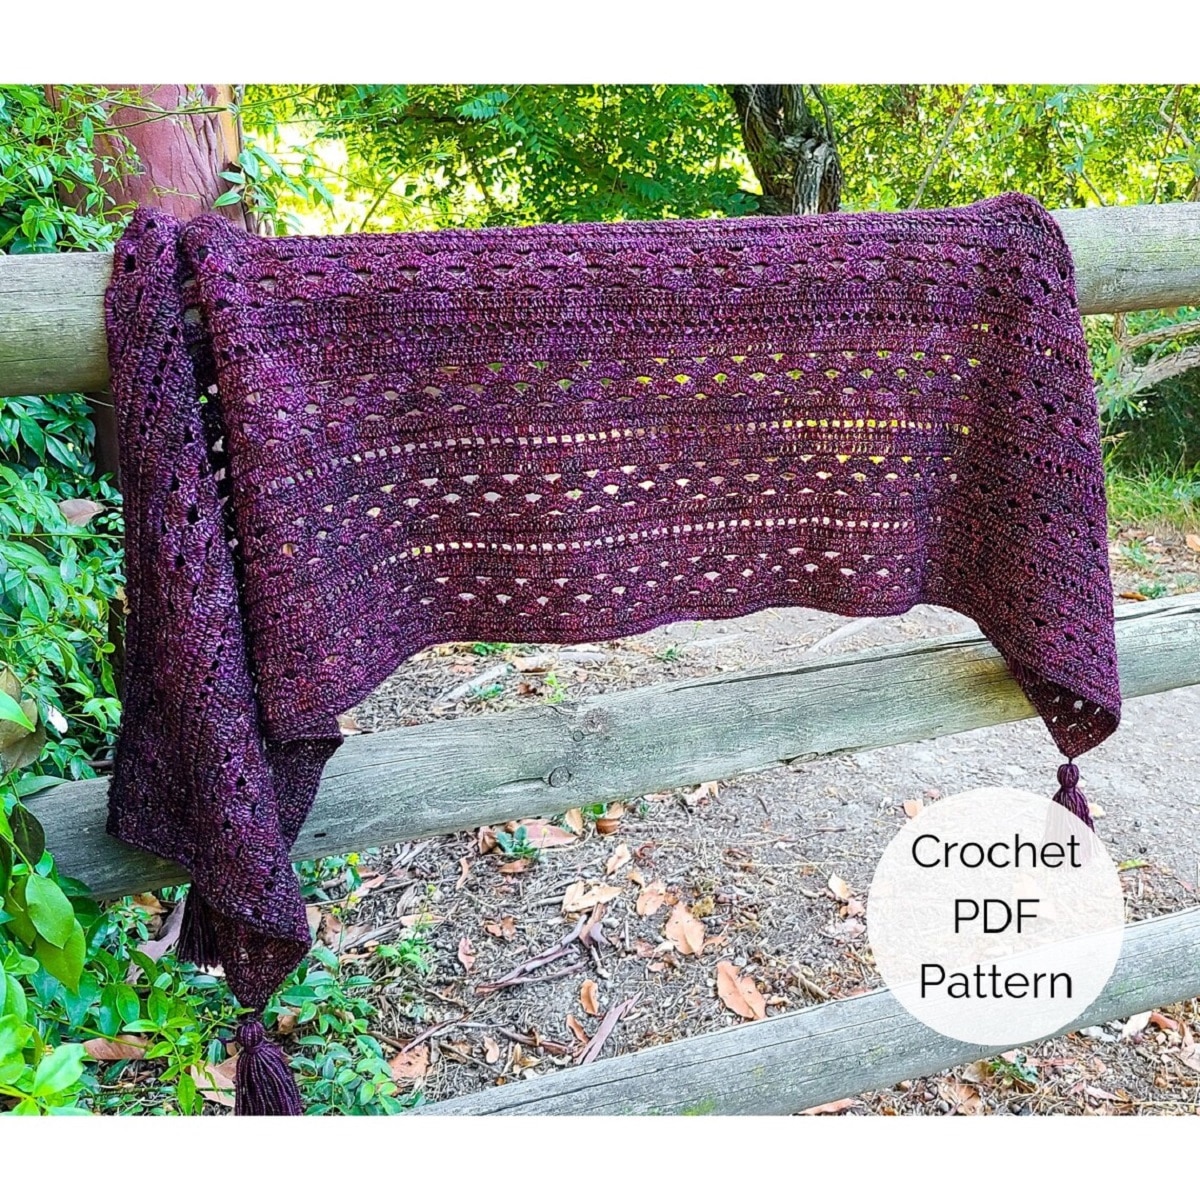  Dark purple rectangular crochet shawl draped over a wooden fence next to a muddy path and some leaves.